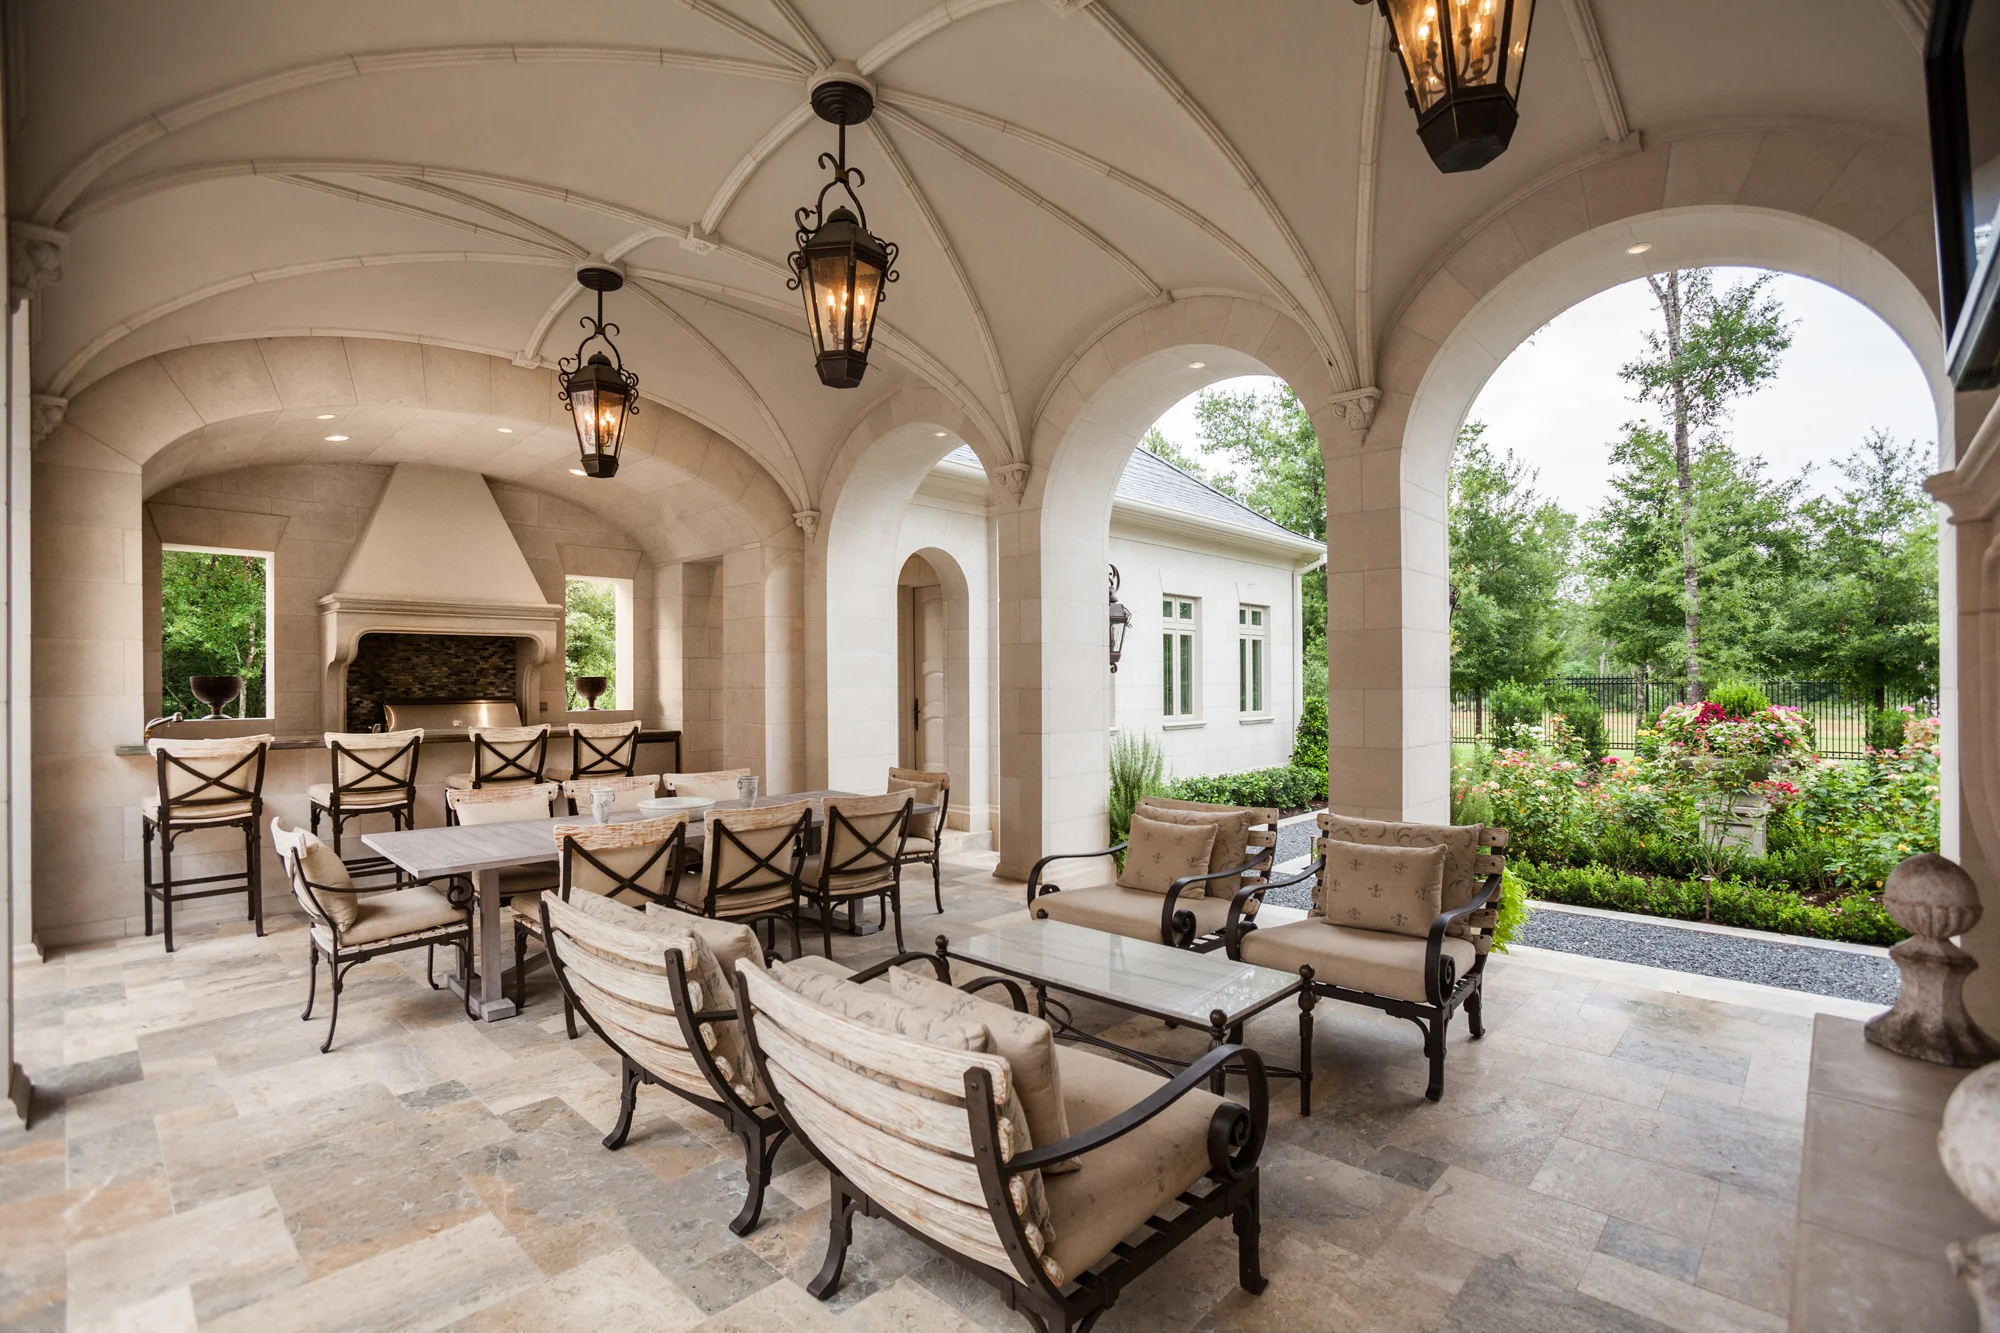 French formal outdoor covered patio area